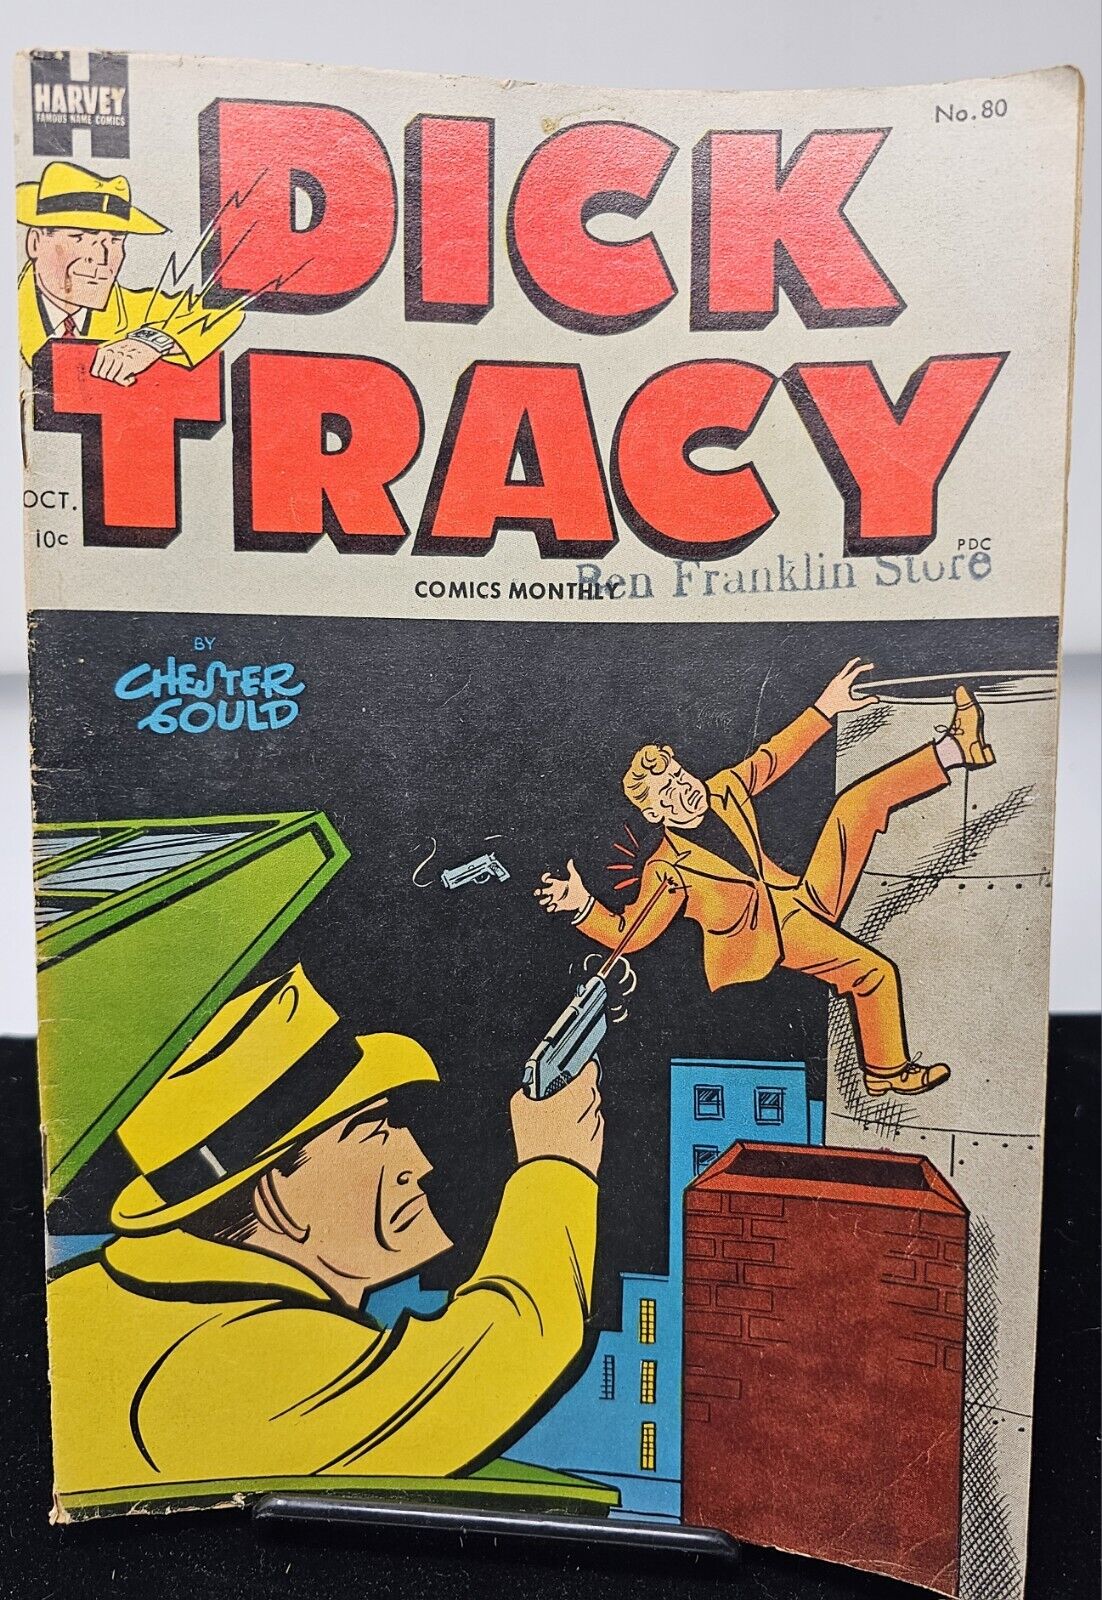 VTG 10 Cent Dick Tracy Comic Book #80 Oct Issue